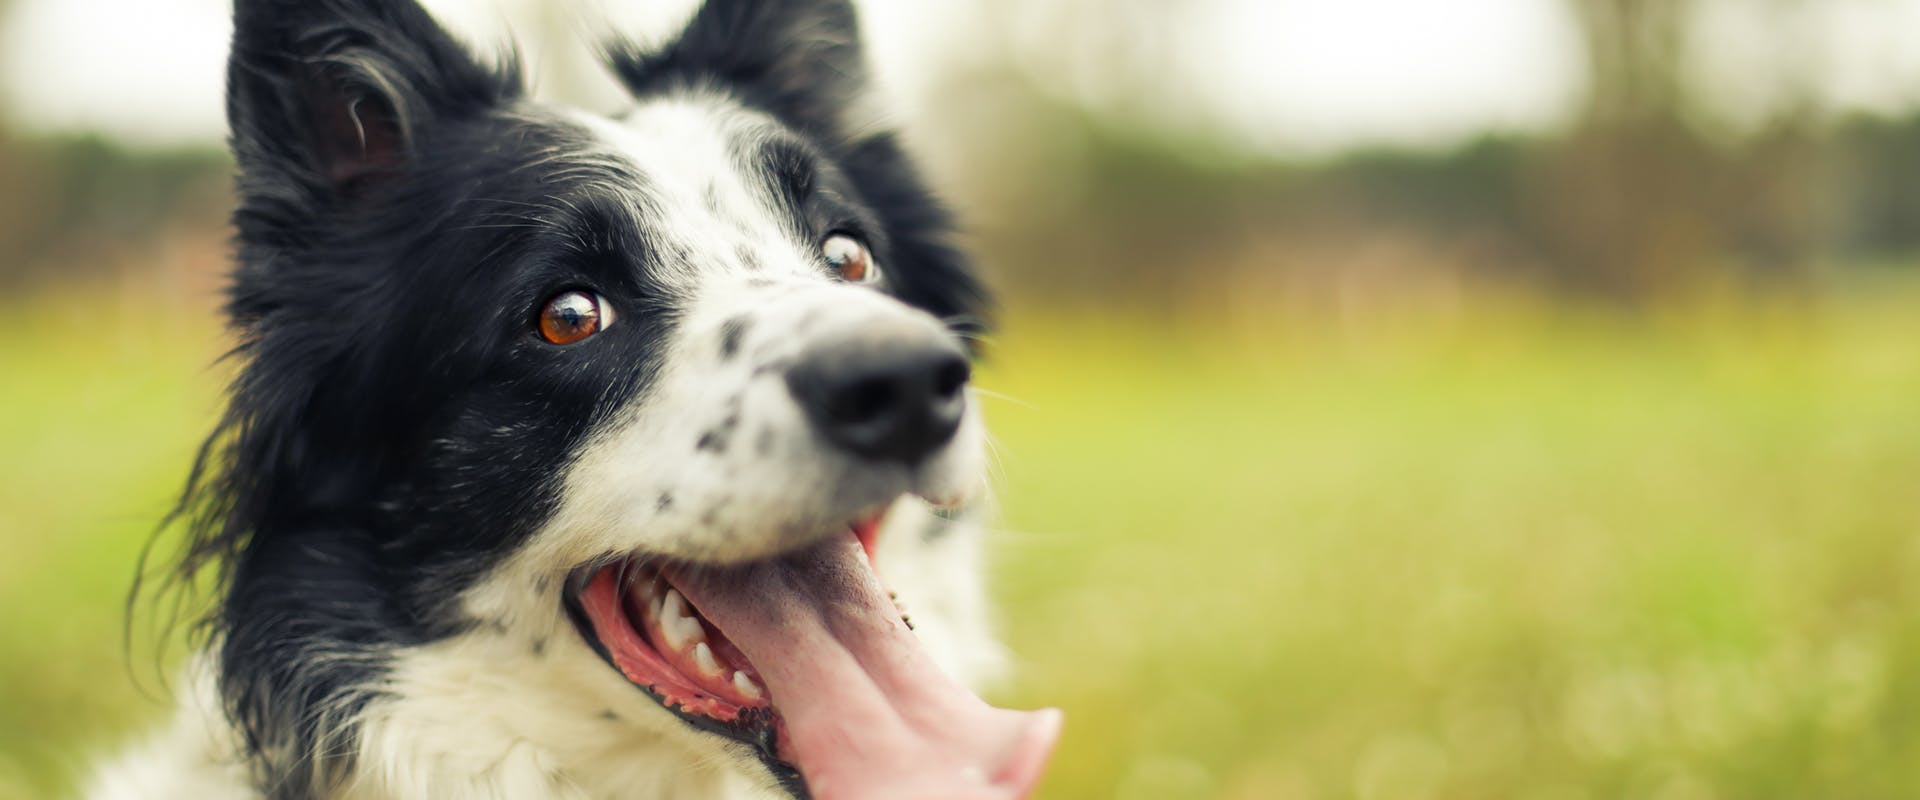 A happy looking Border Collie dog